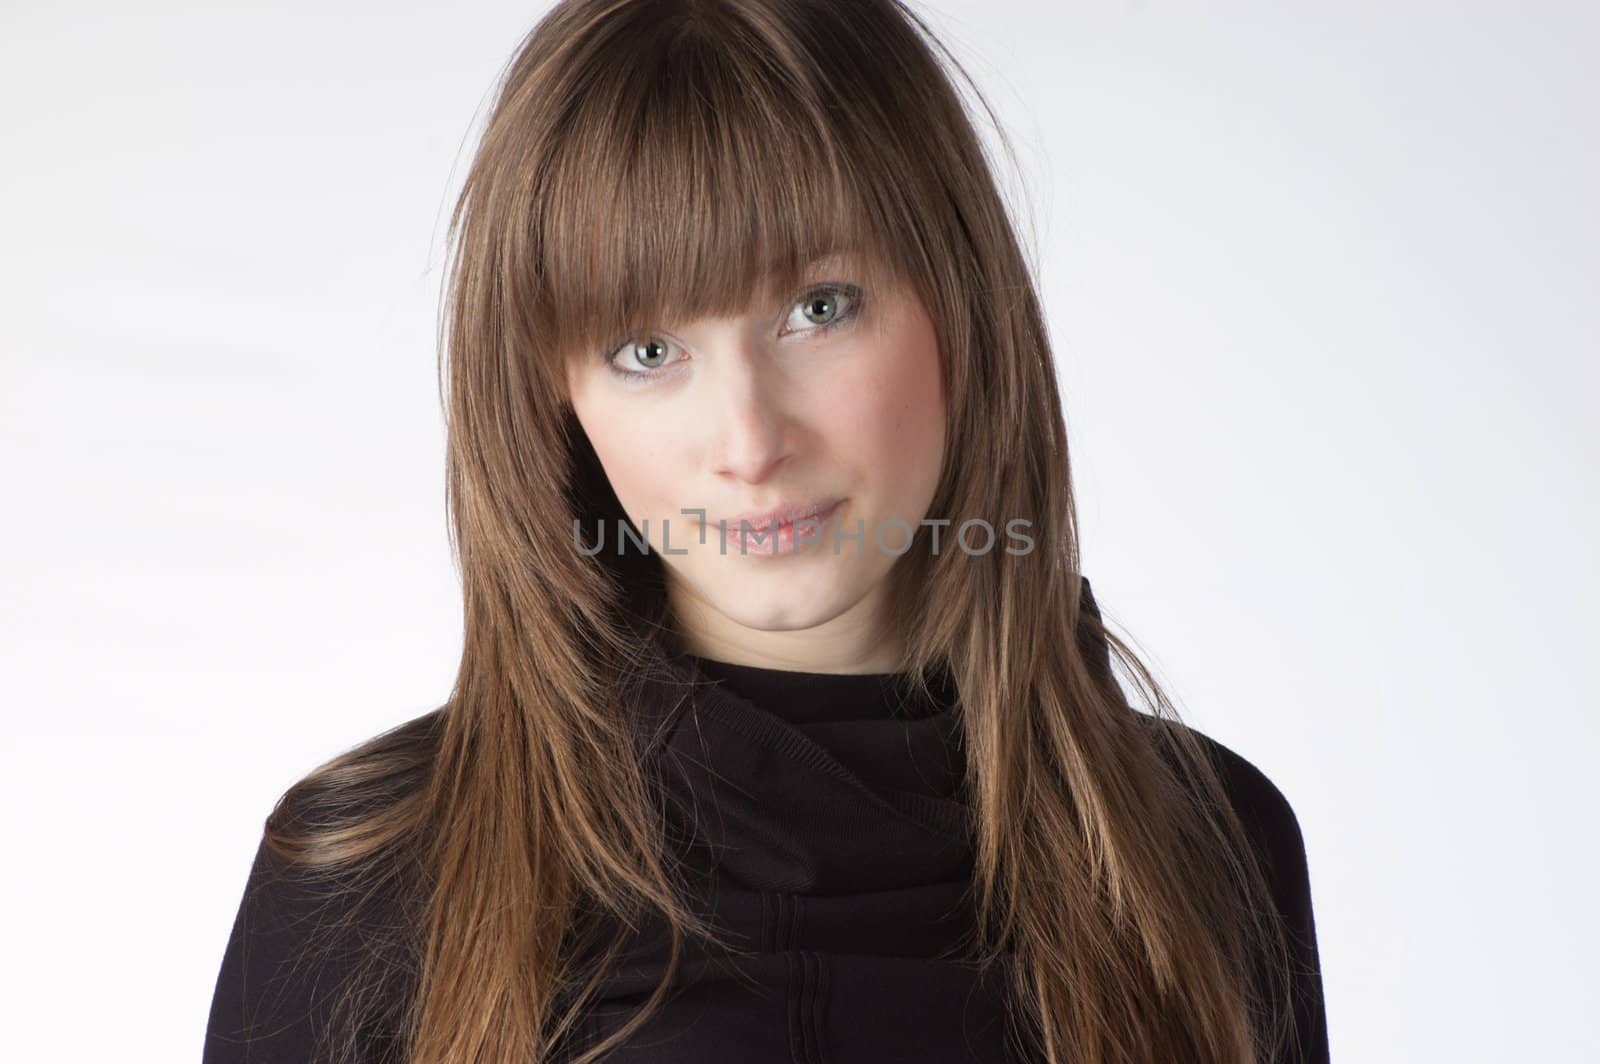 Head and shoulder portrait of smiling girl with blond hair isolated on white background.